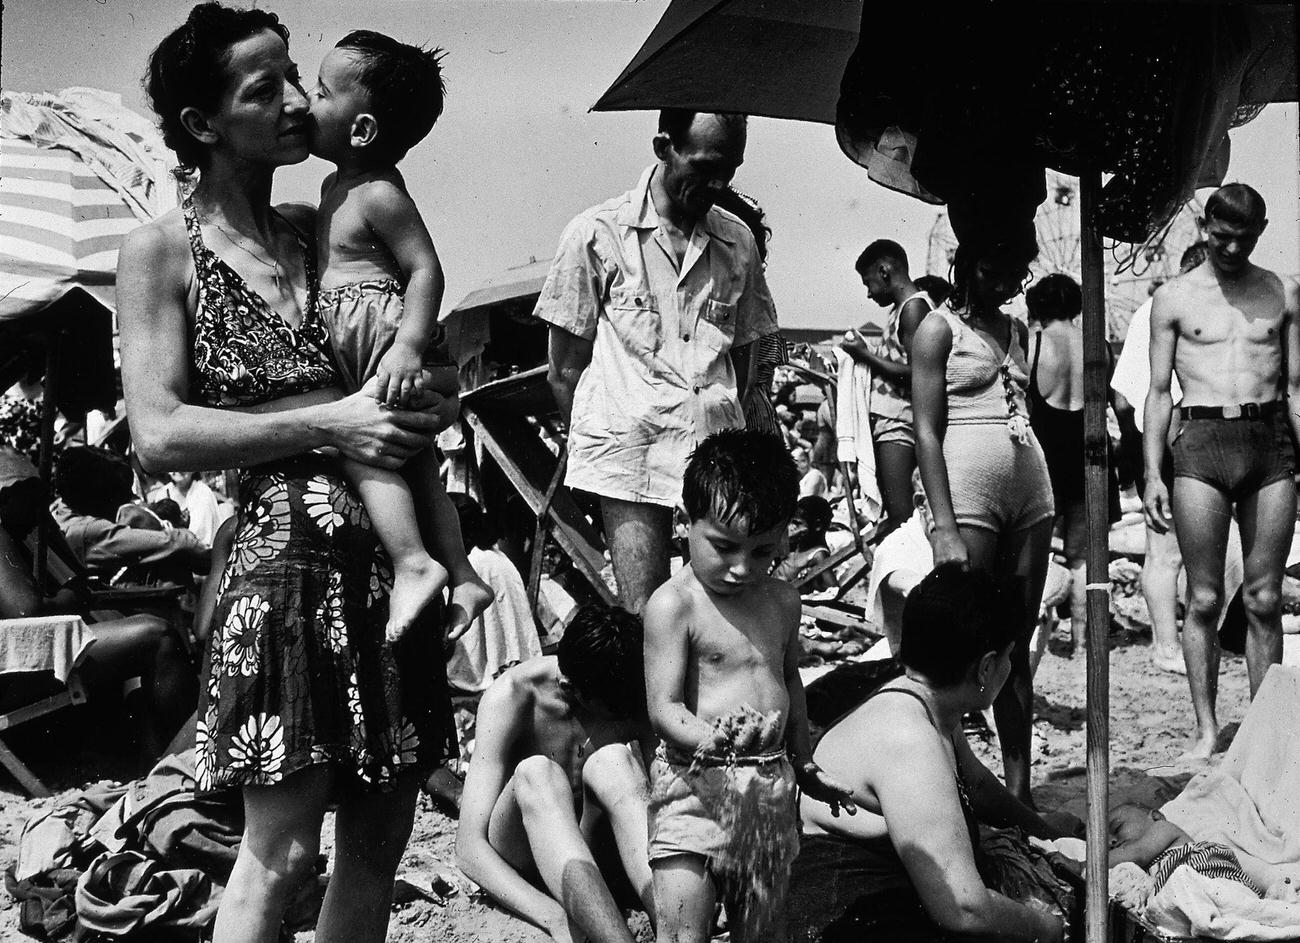 Extremely Crowded Section Of Coney Island Beach, 1938